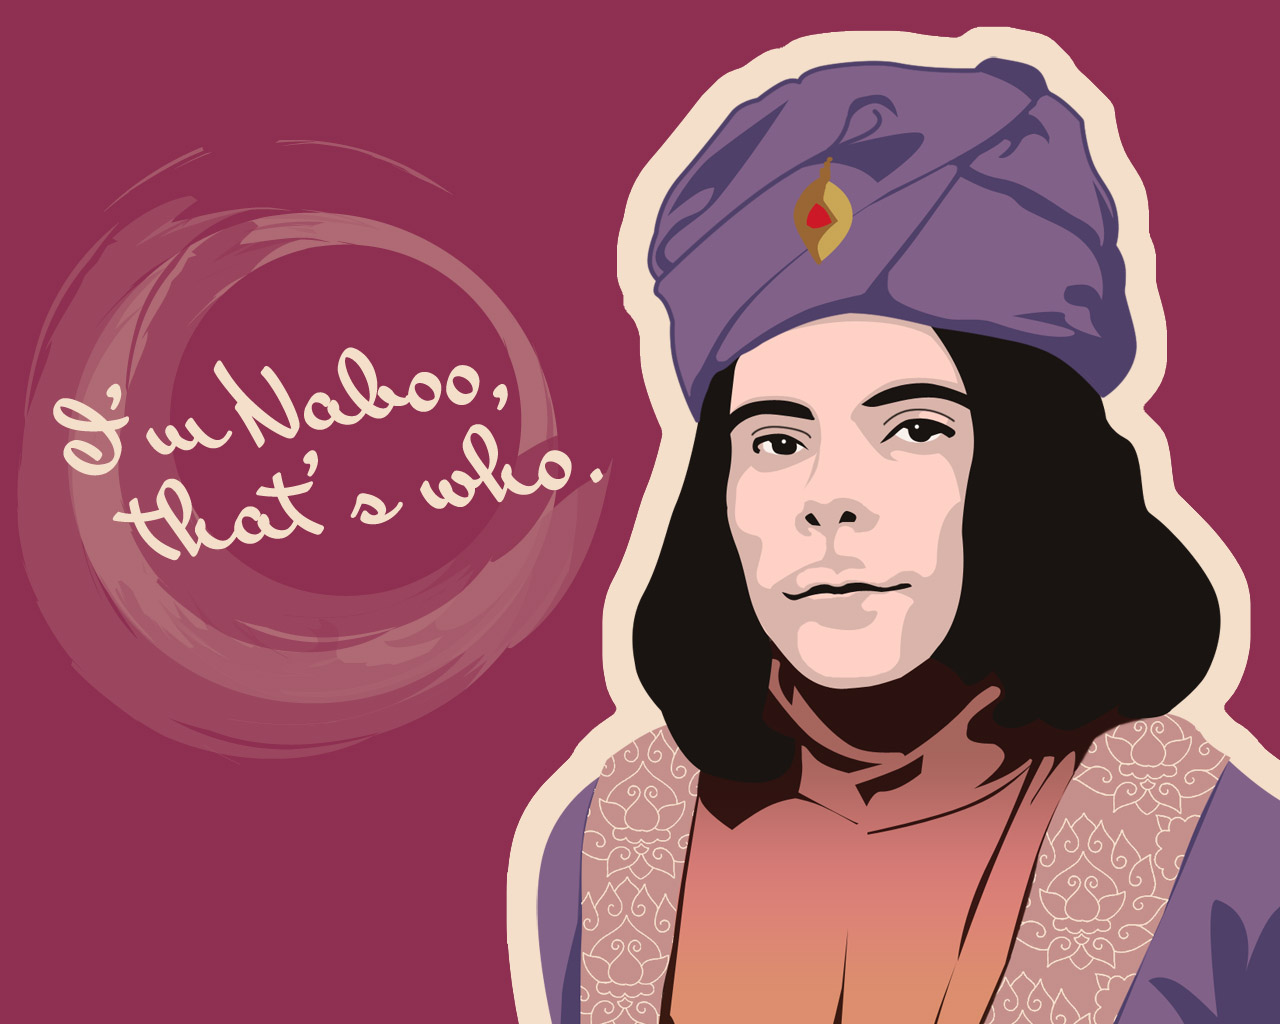 Wallpaper Naboo The Enigma By Sweetvillain